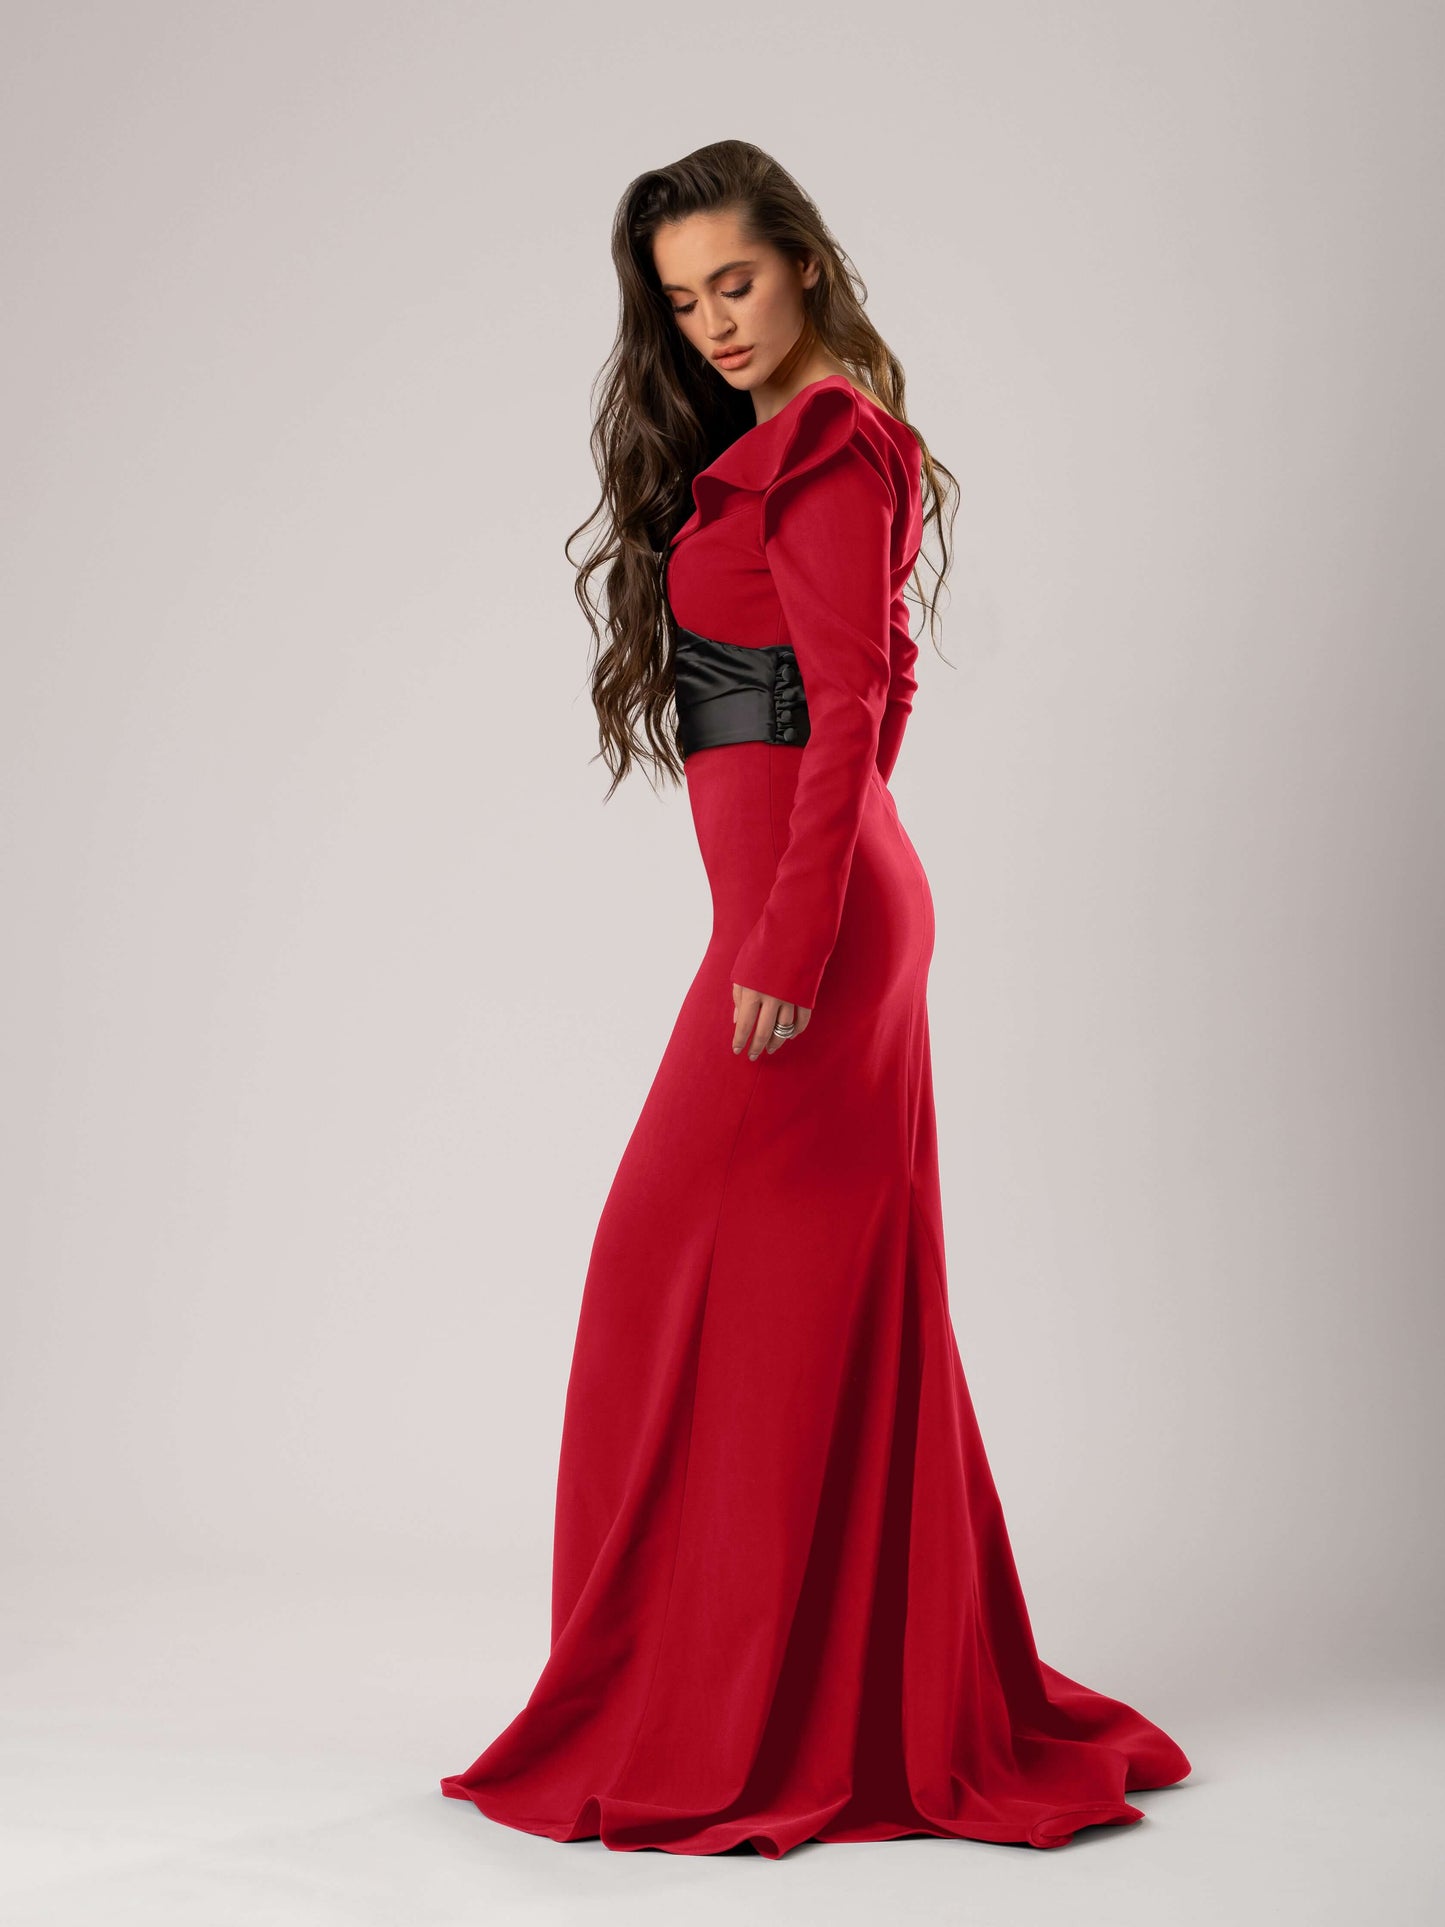 Magical Night Evening Dress with Satin Belt - Red & Black